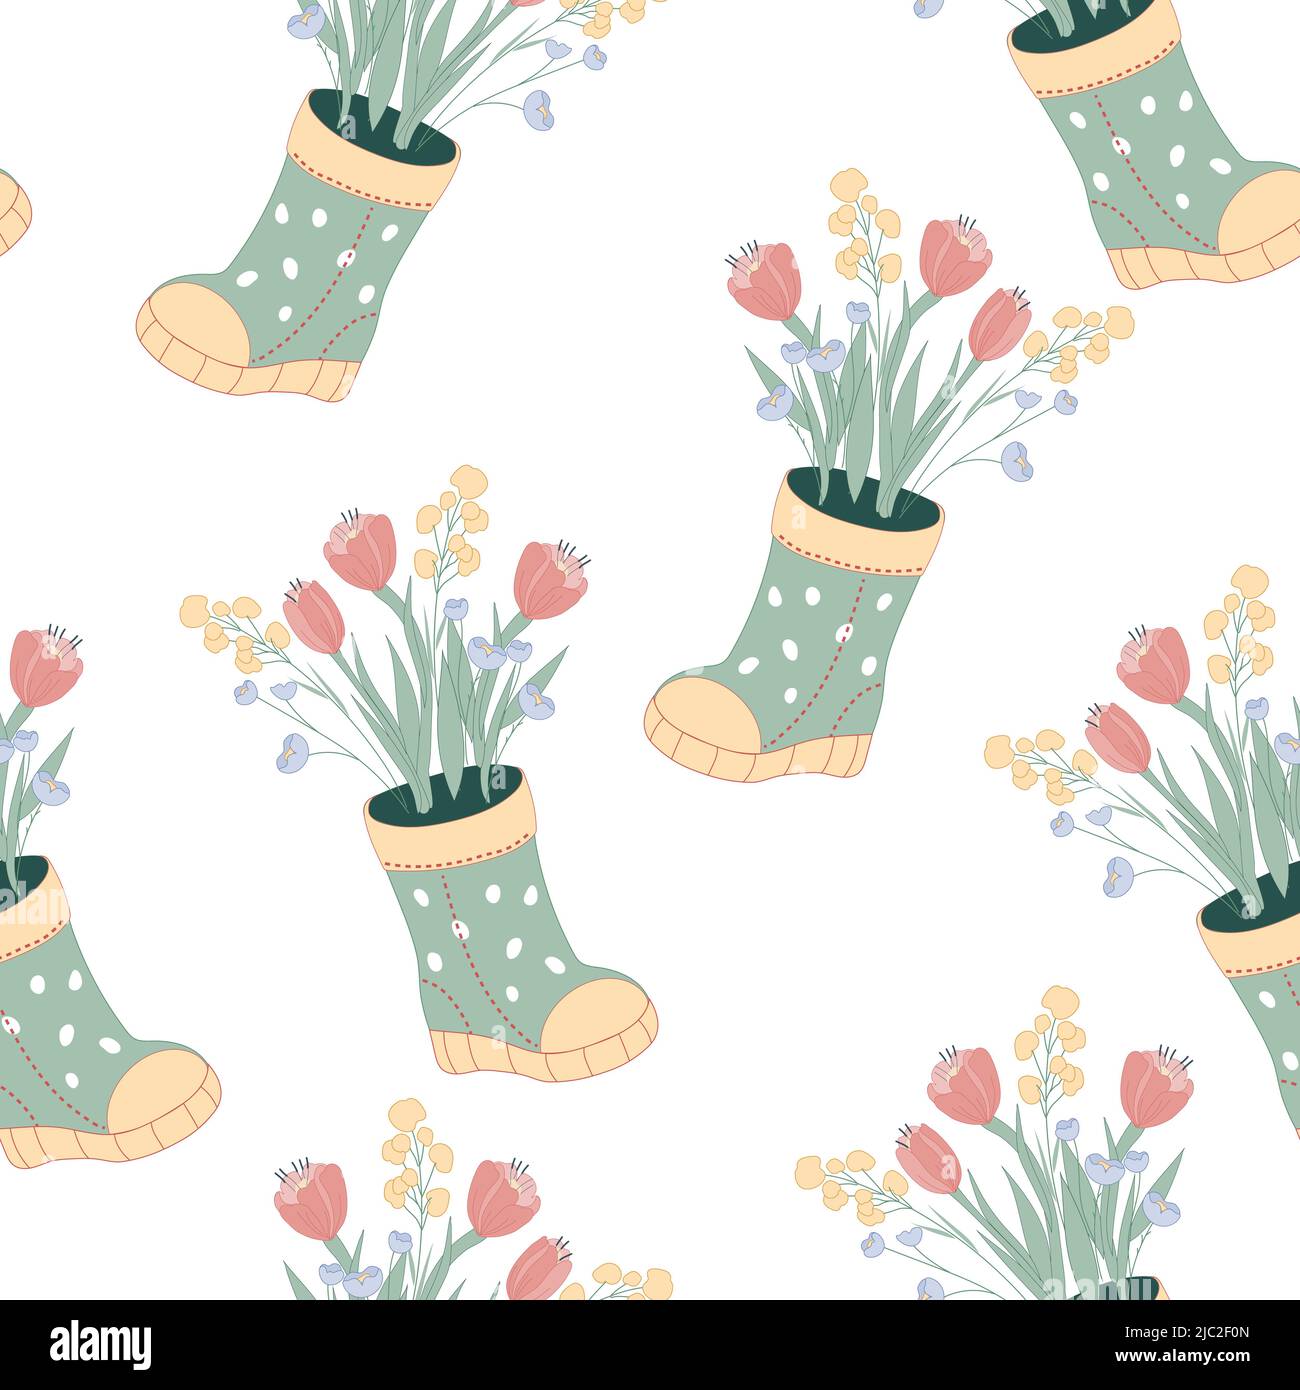 Seamless pattern with welly boots and flowers, hand drawn vector illustration isolated on a white background. Decorative endless pattern for summer an Stock Vector